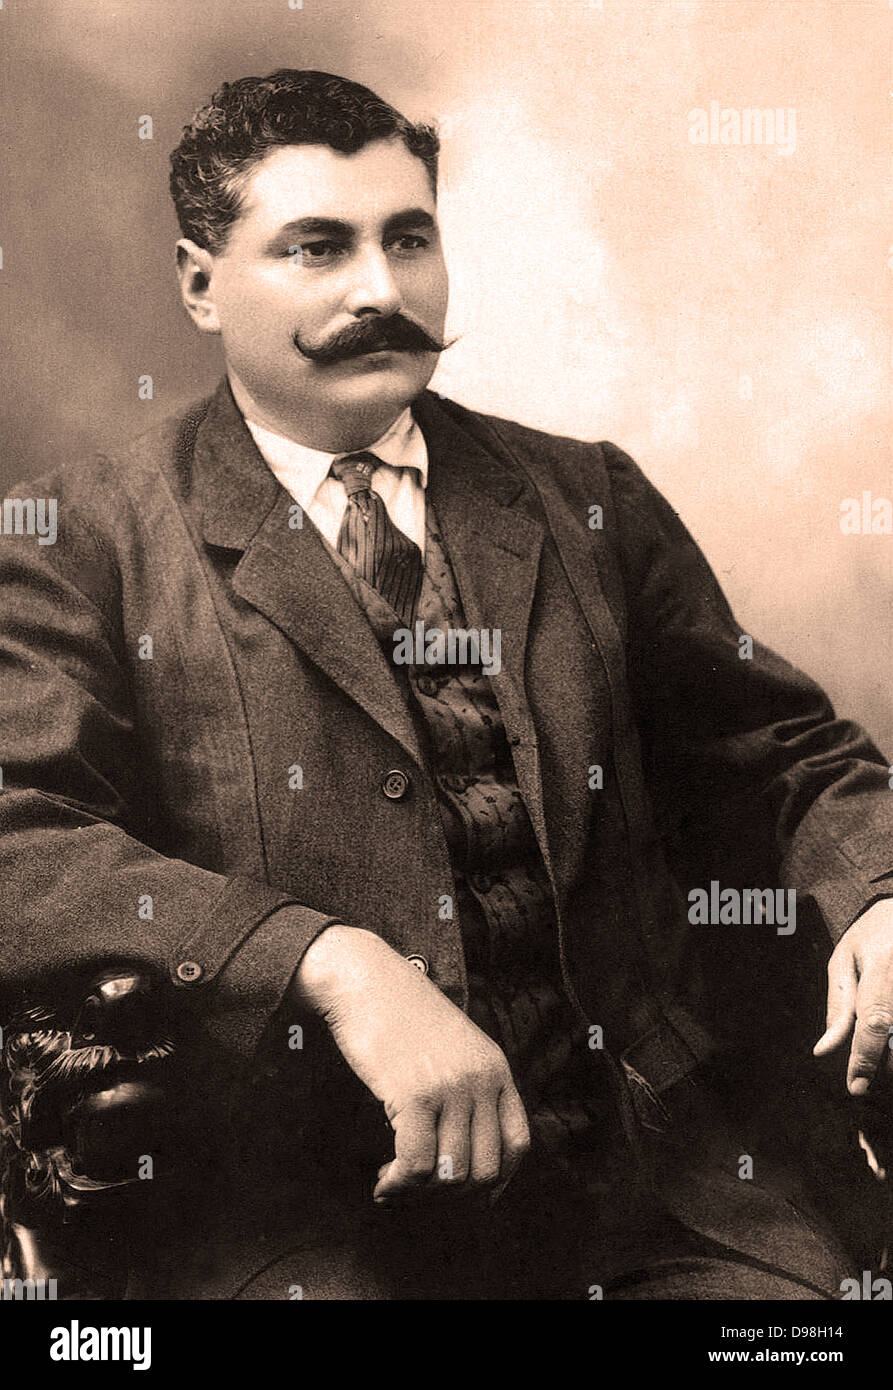 Eulalio Gutiérrez Ortiz (February 2, 1881 – August 12, 1939) was elected provisional president of Mexico during the Aguascalientes Convention and led the country for a few months between November 6, 1914, and January 16, 1915. Stock Photo